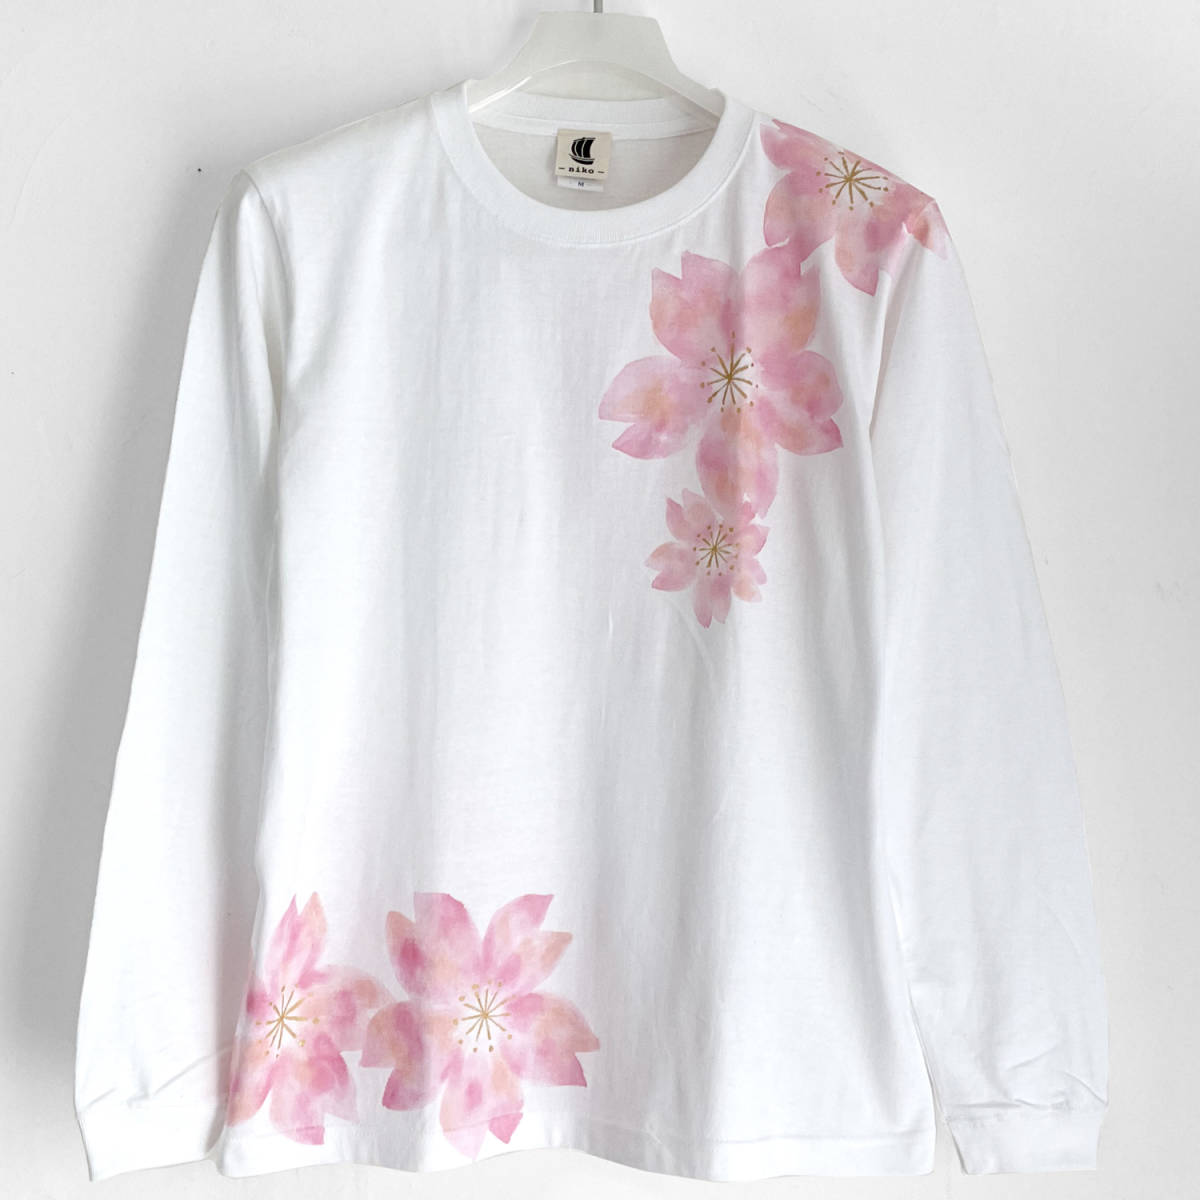 Sakura pattern T-shirt, white, S size, hand-painted long-sleeved T-shirt, ribbed sleeves, long T-shirt, floral pattern, Japanese pattern, pink, T-shirt, long sleeve, S size